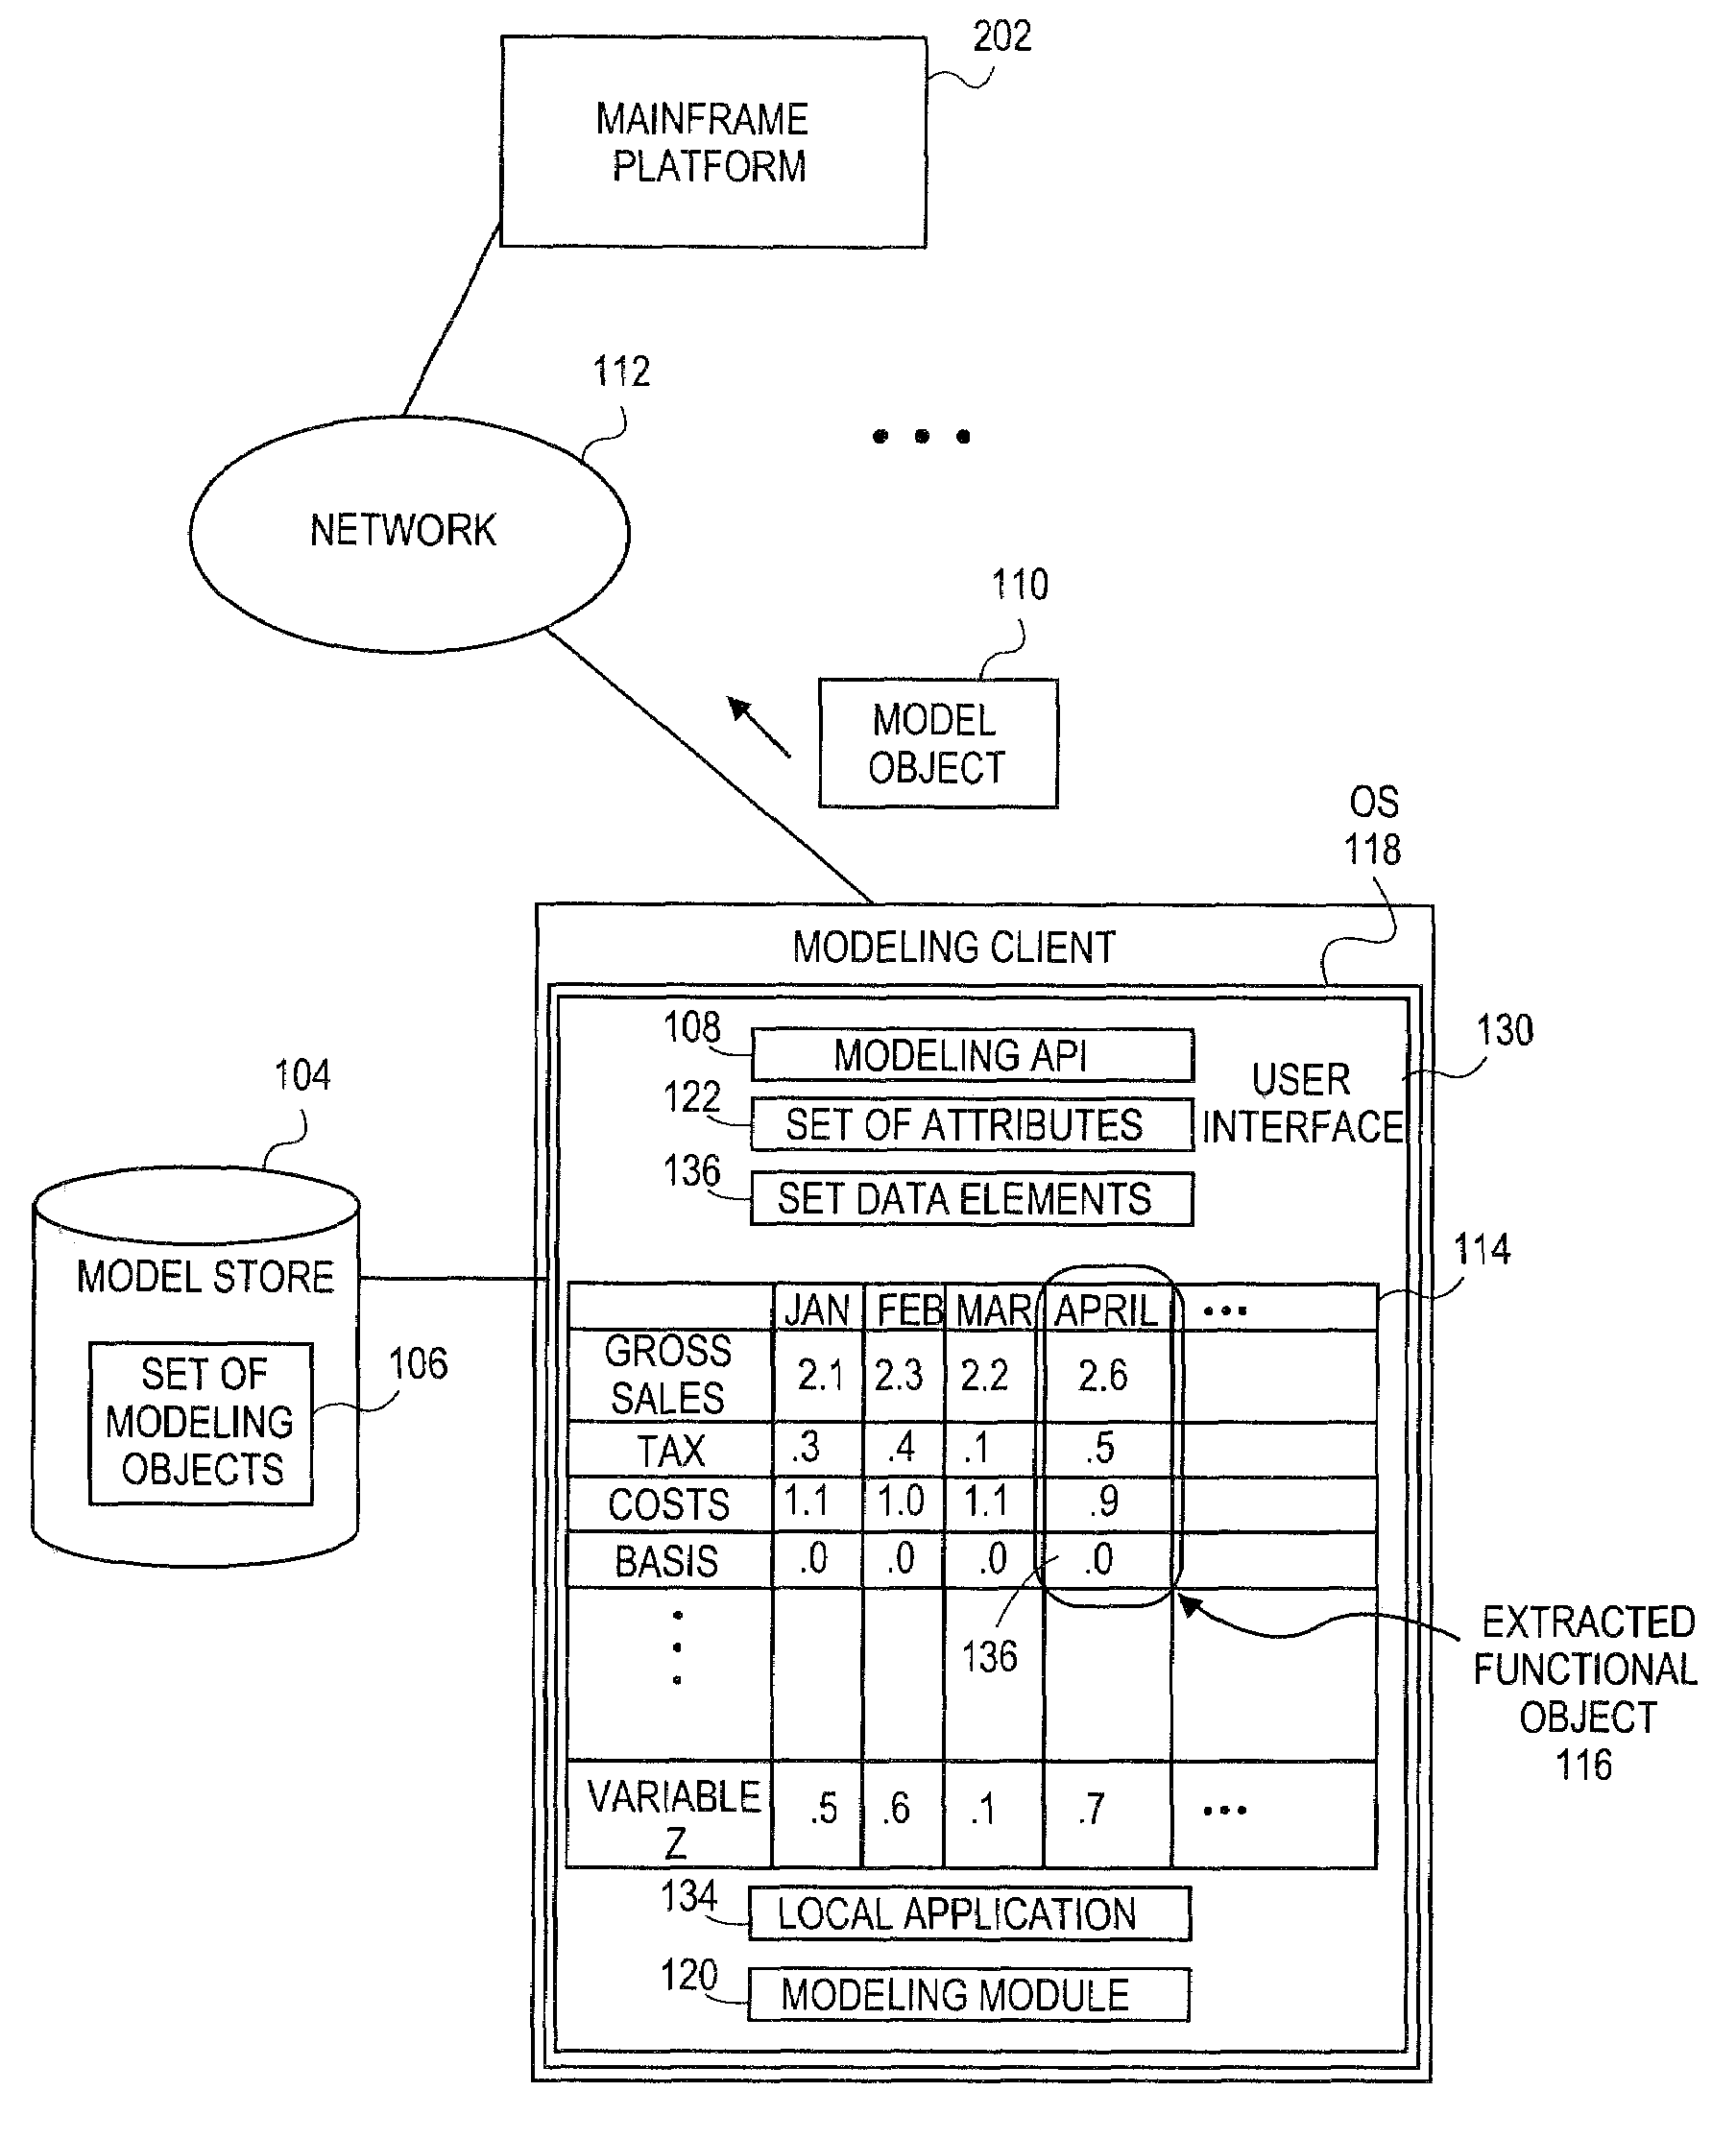 Systems and methods for object-based modeling using composite model object having independently updatable component objects